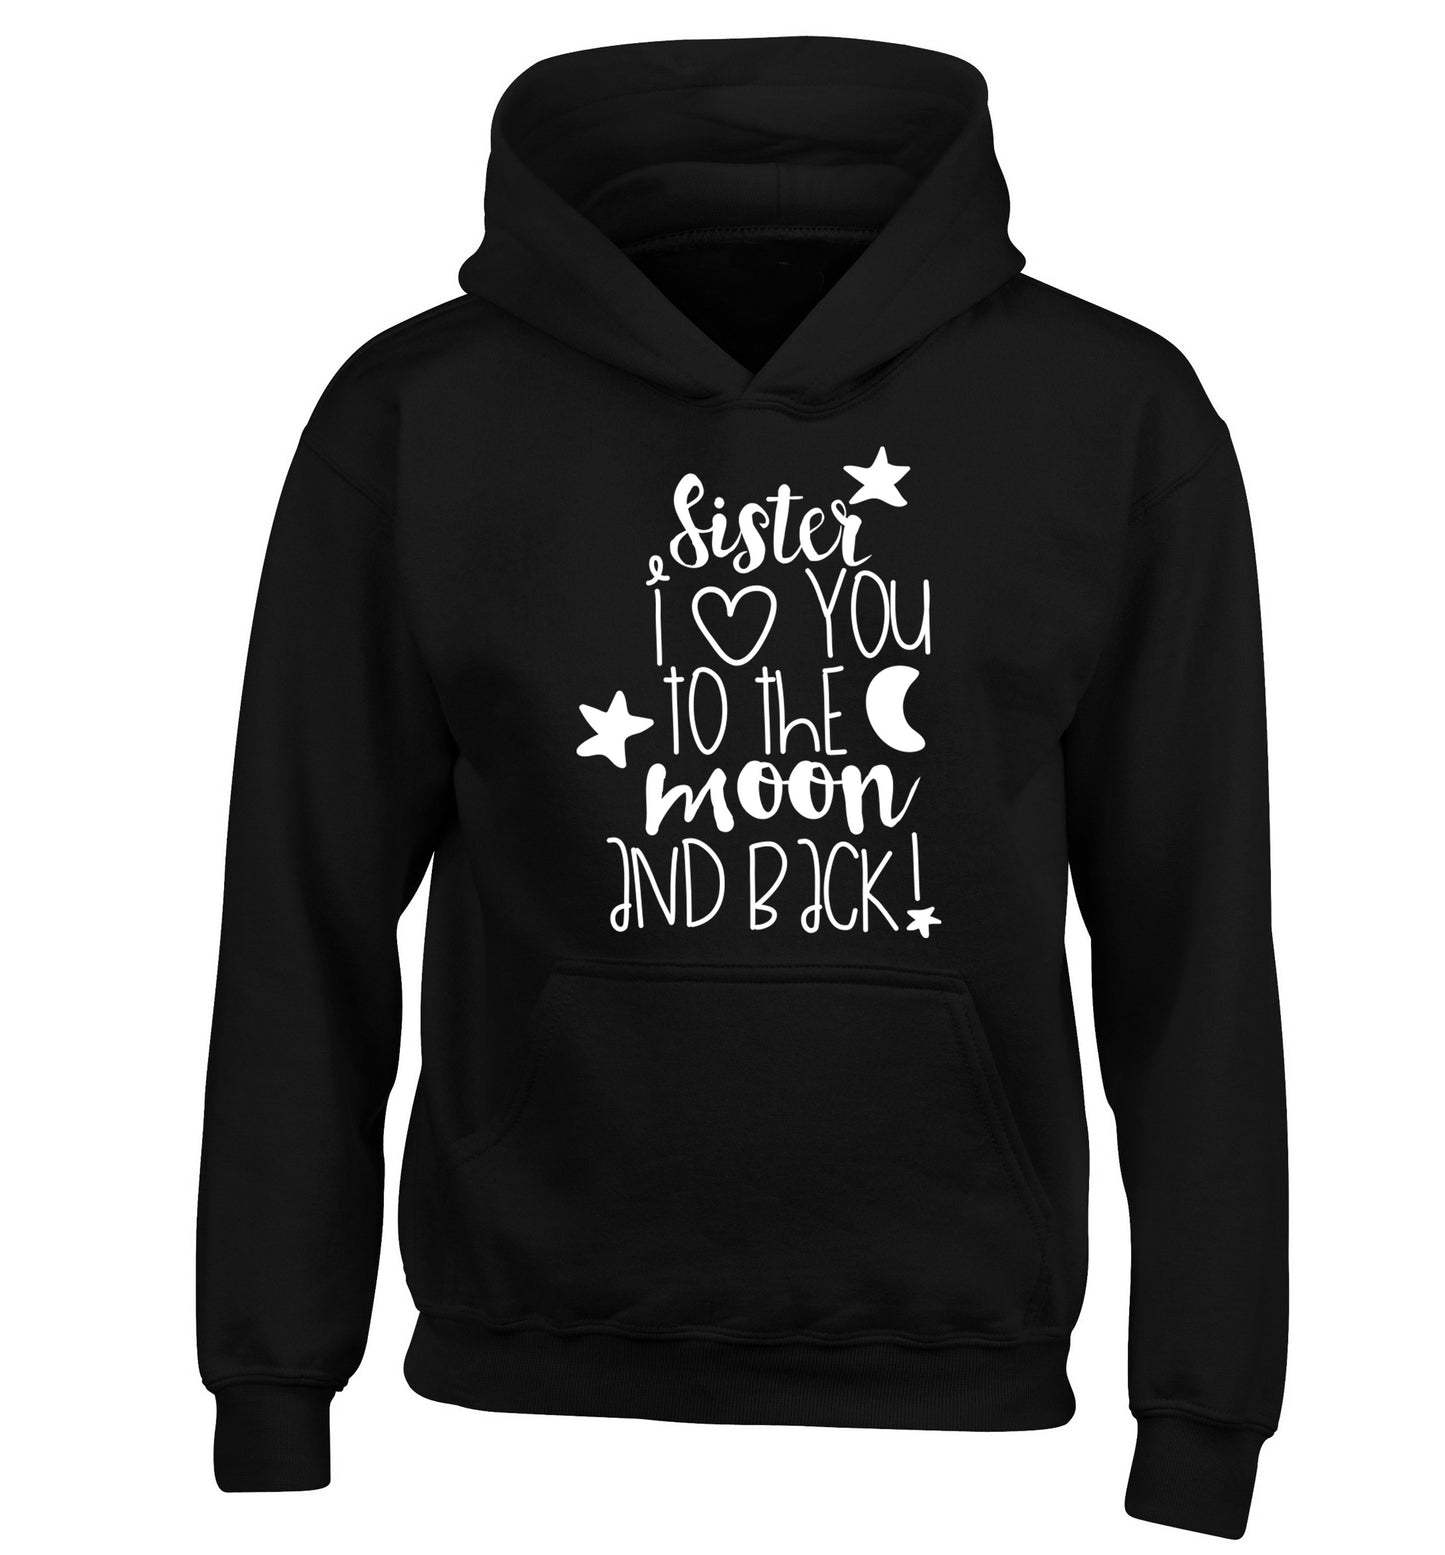 Sister I love you to the moon and back children's black hoodie 12-14 Years